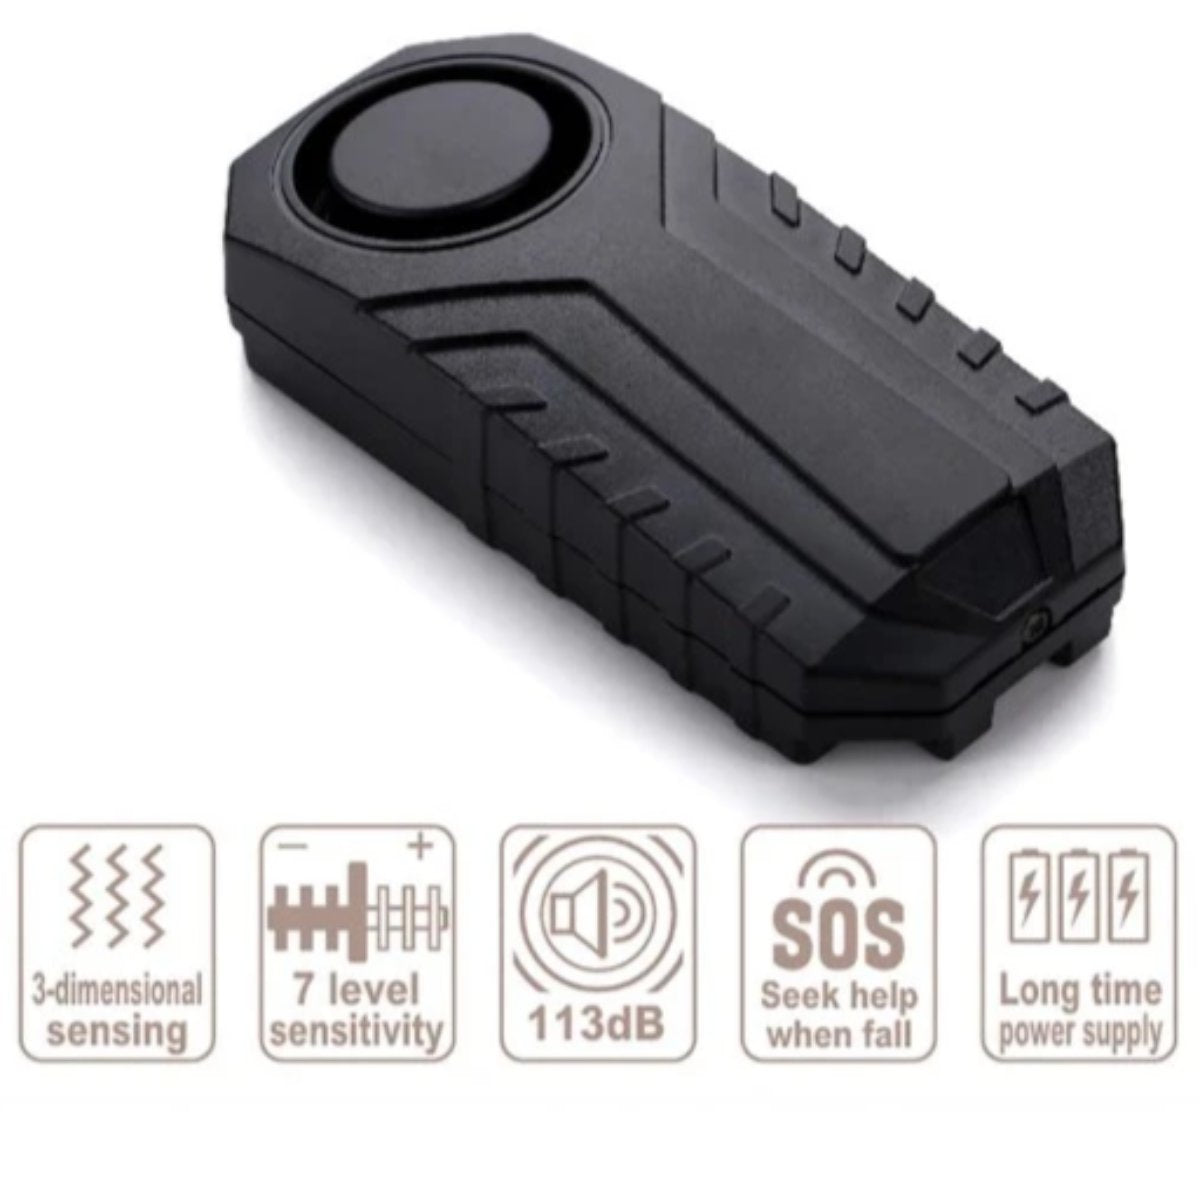 A black Motorcycle Waterproof 113dB Wireless Anti-Theft Remote Alarm with a number of buttons on it that functions as a security system.